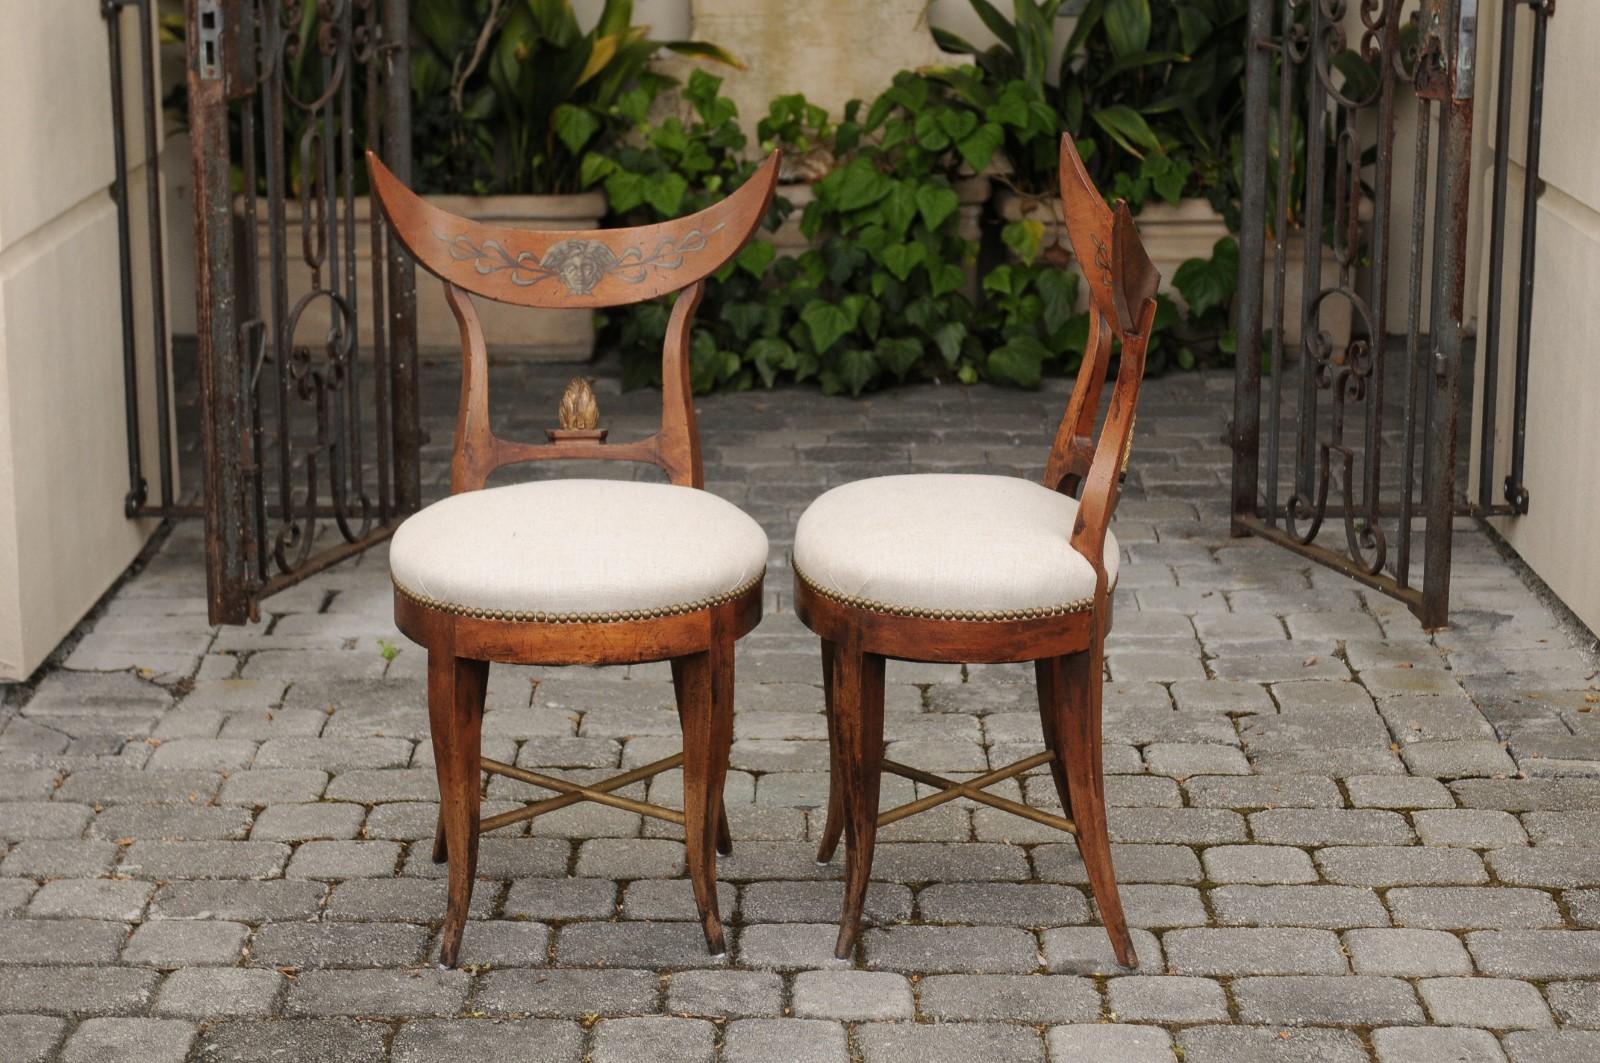 Pair of Italian 1860s Upholstered Side Chairs with Crescent Backs and Saber Legs In Good Condition For Sale In Atlanta, GA